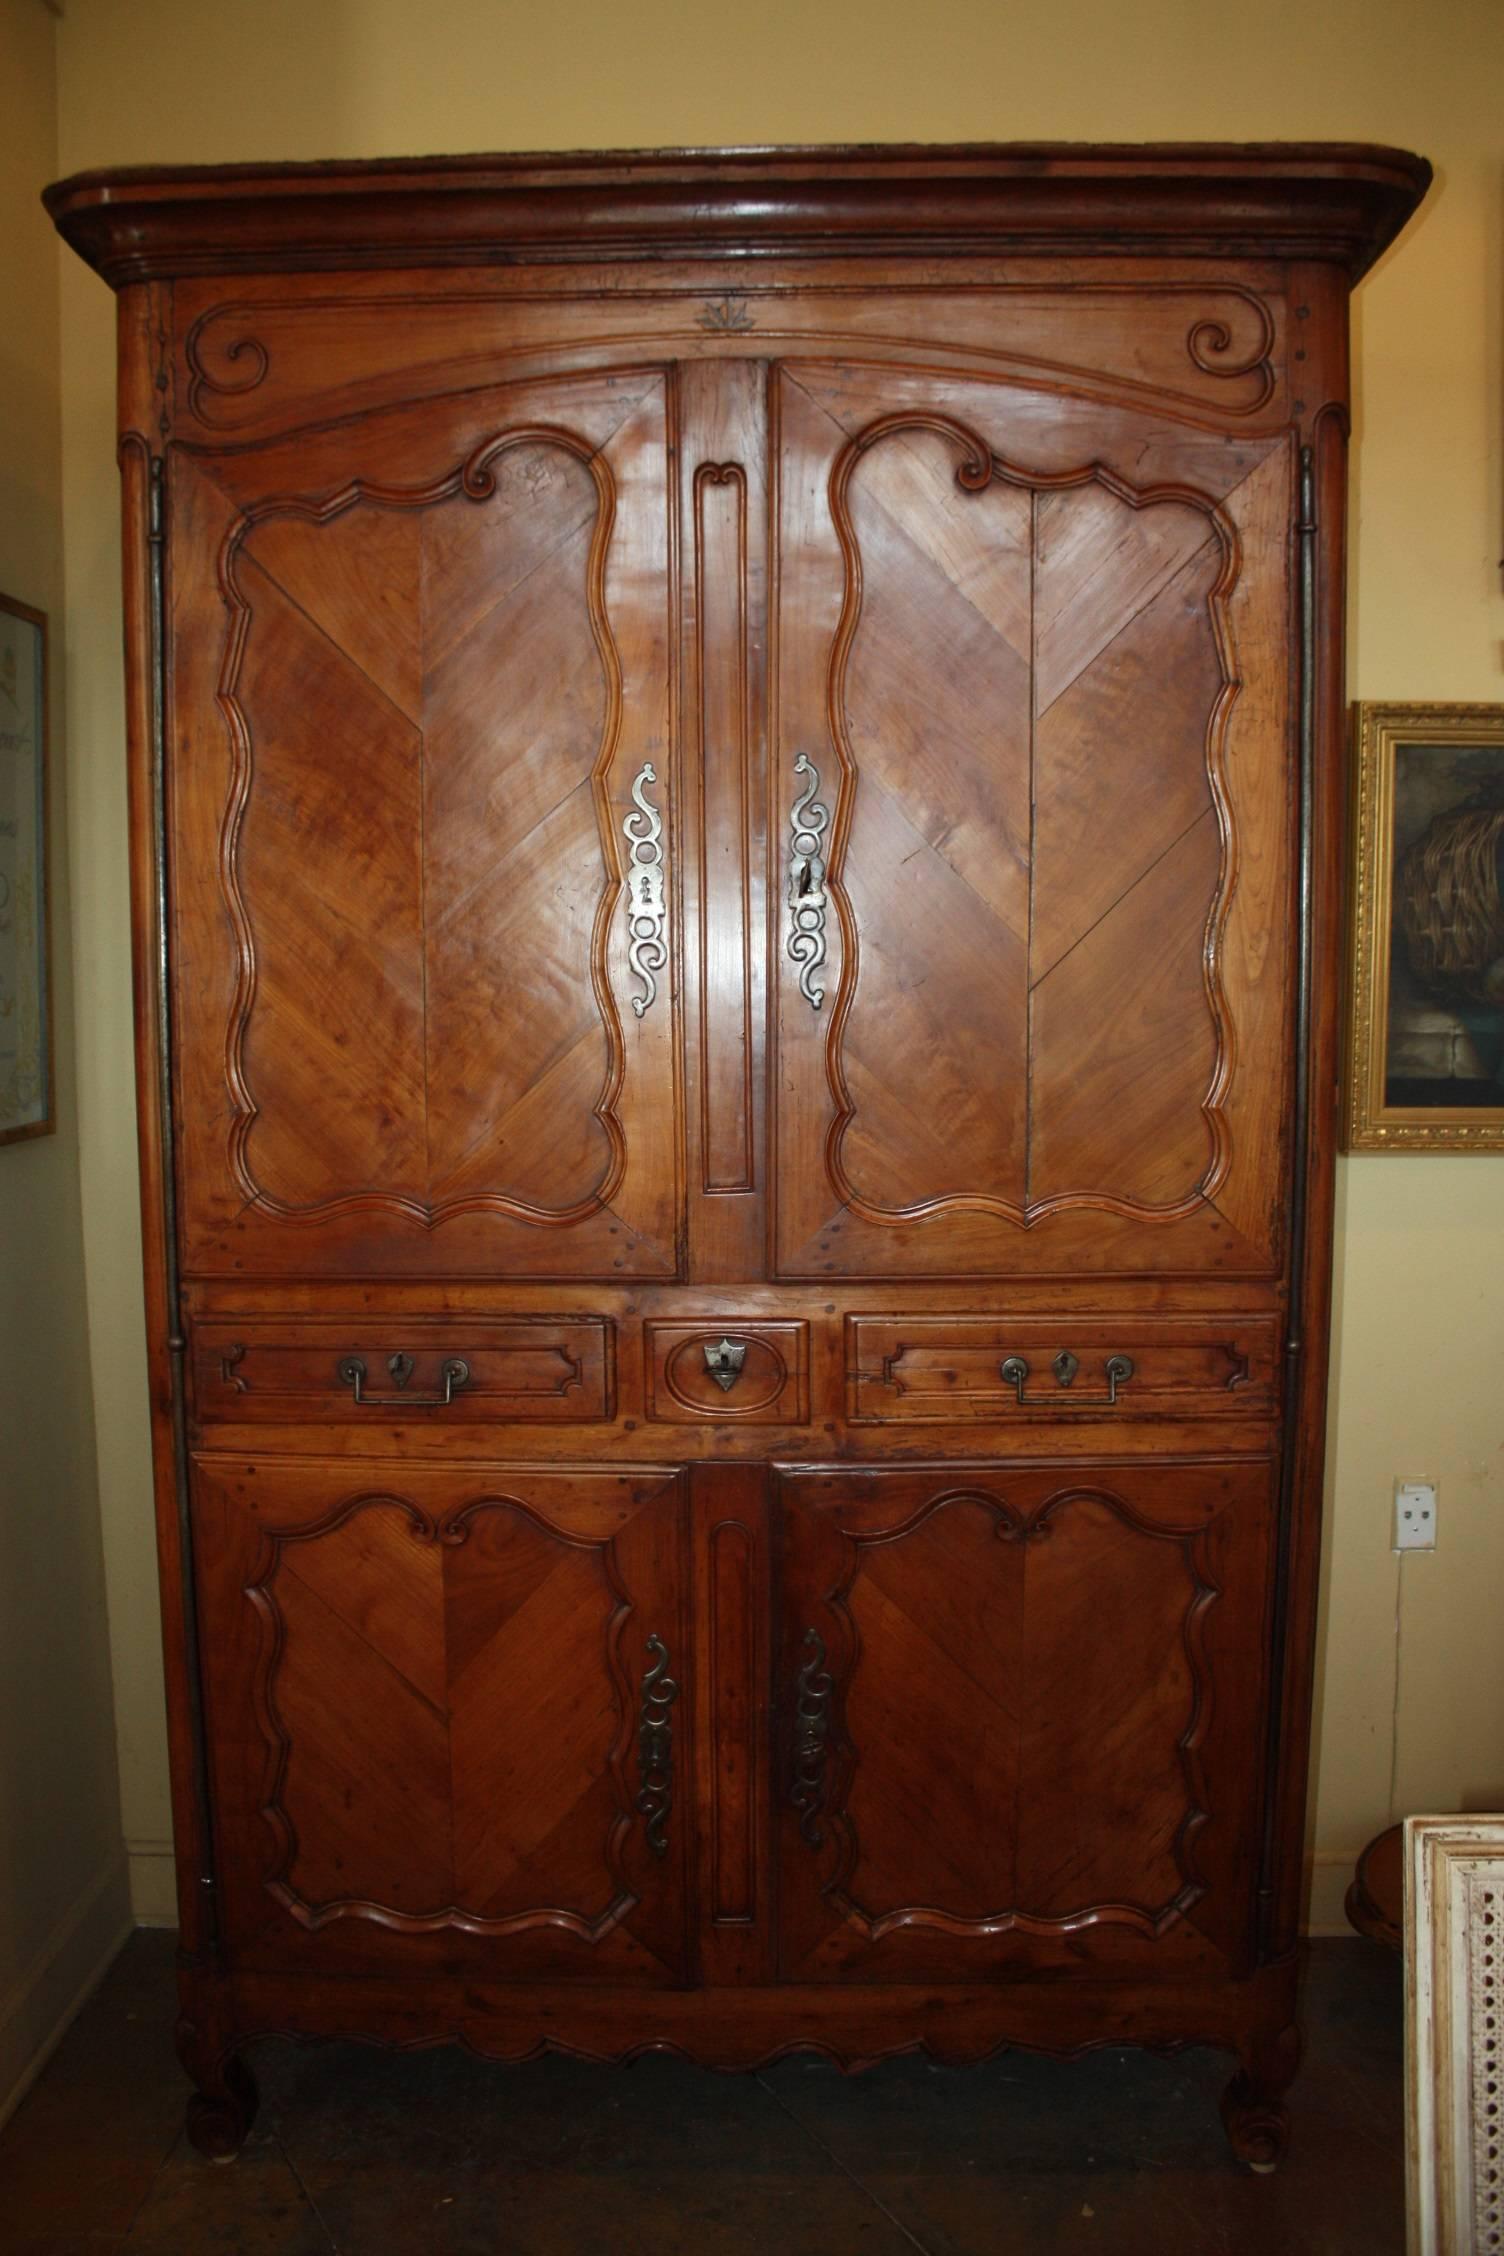 This magnificent, tall cherry armoire 